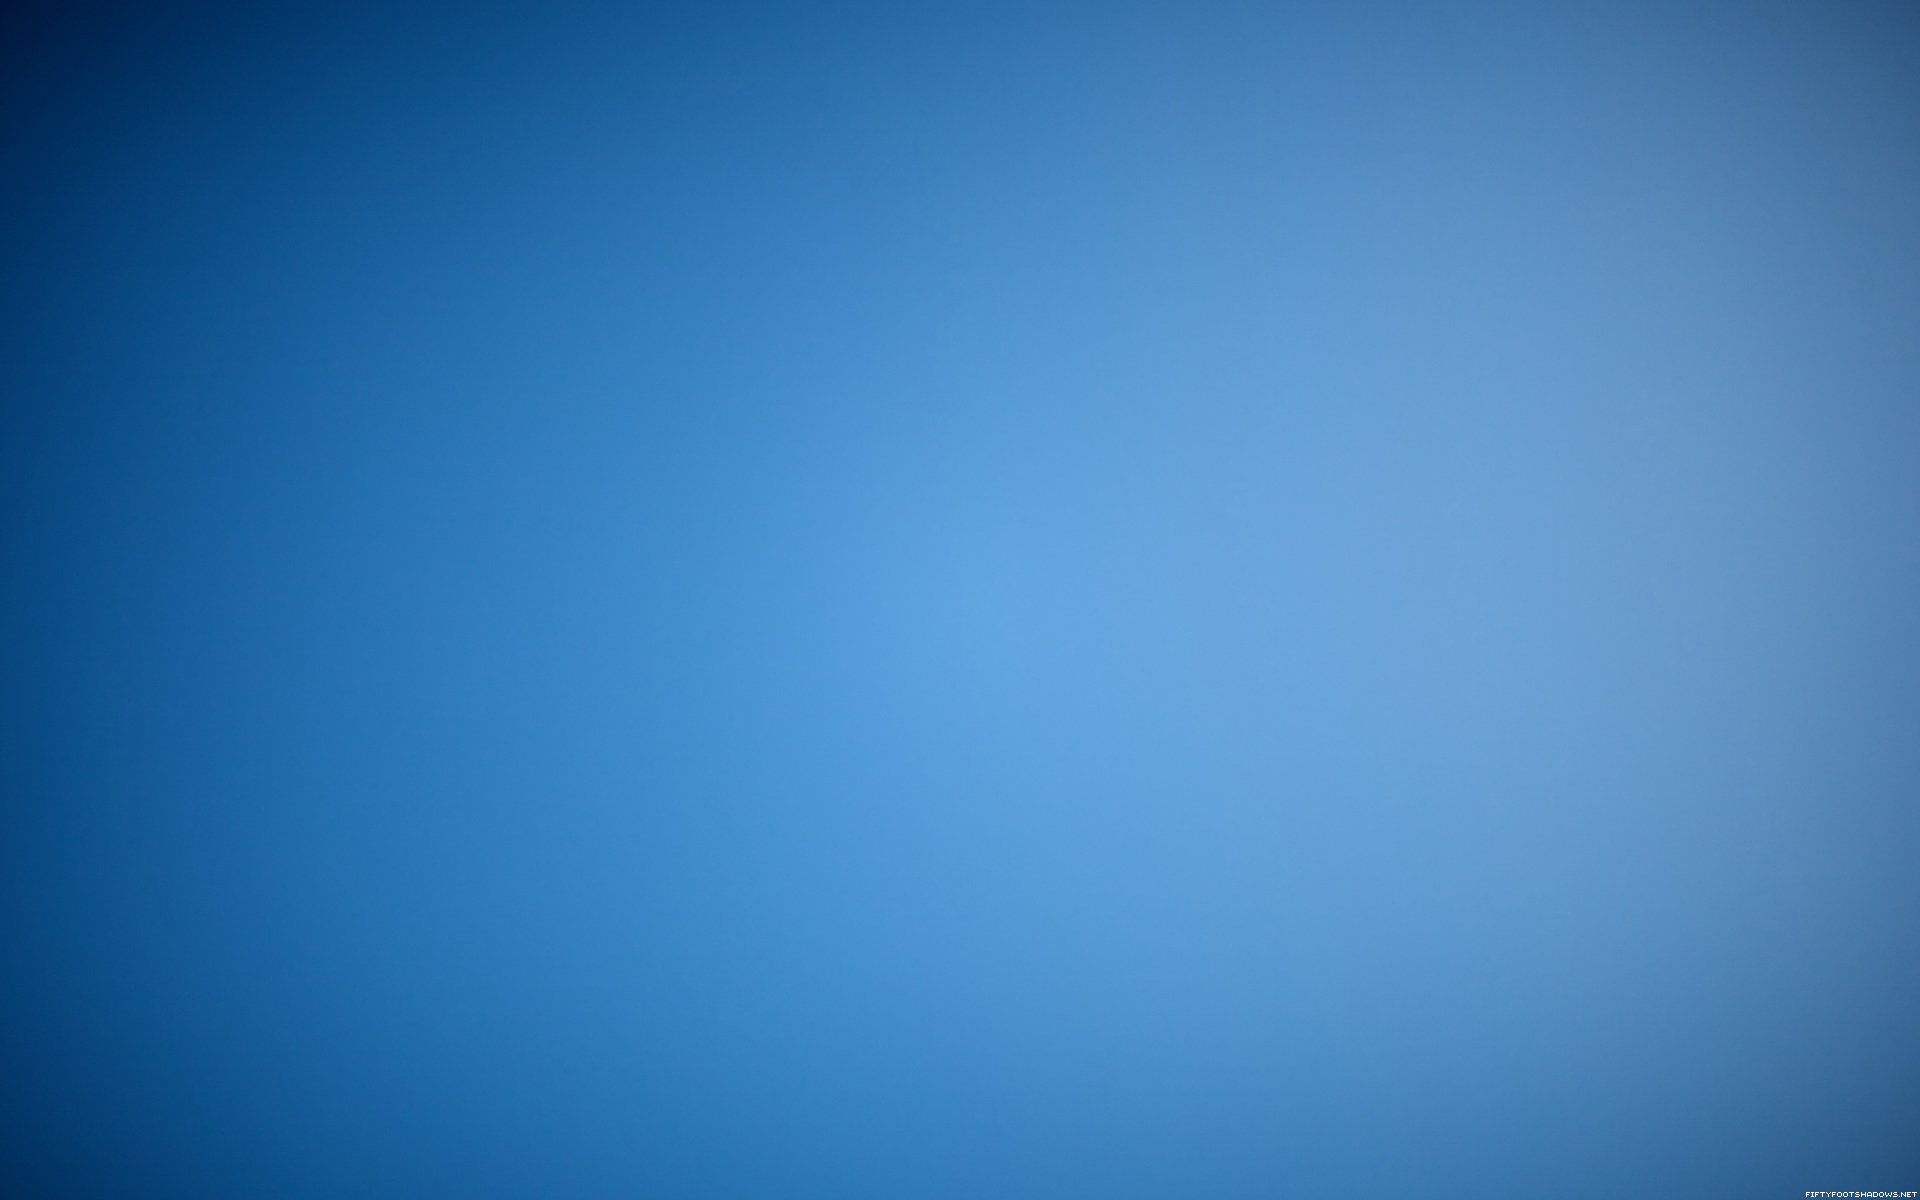 one color wallpaper,blue,daytime,aqua,sky,turquoise